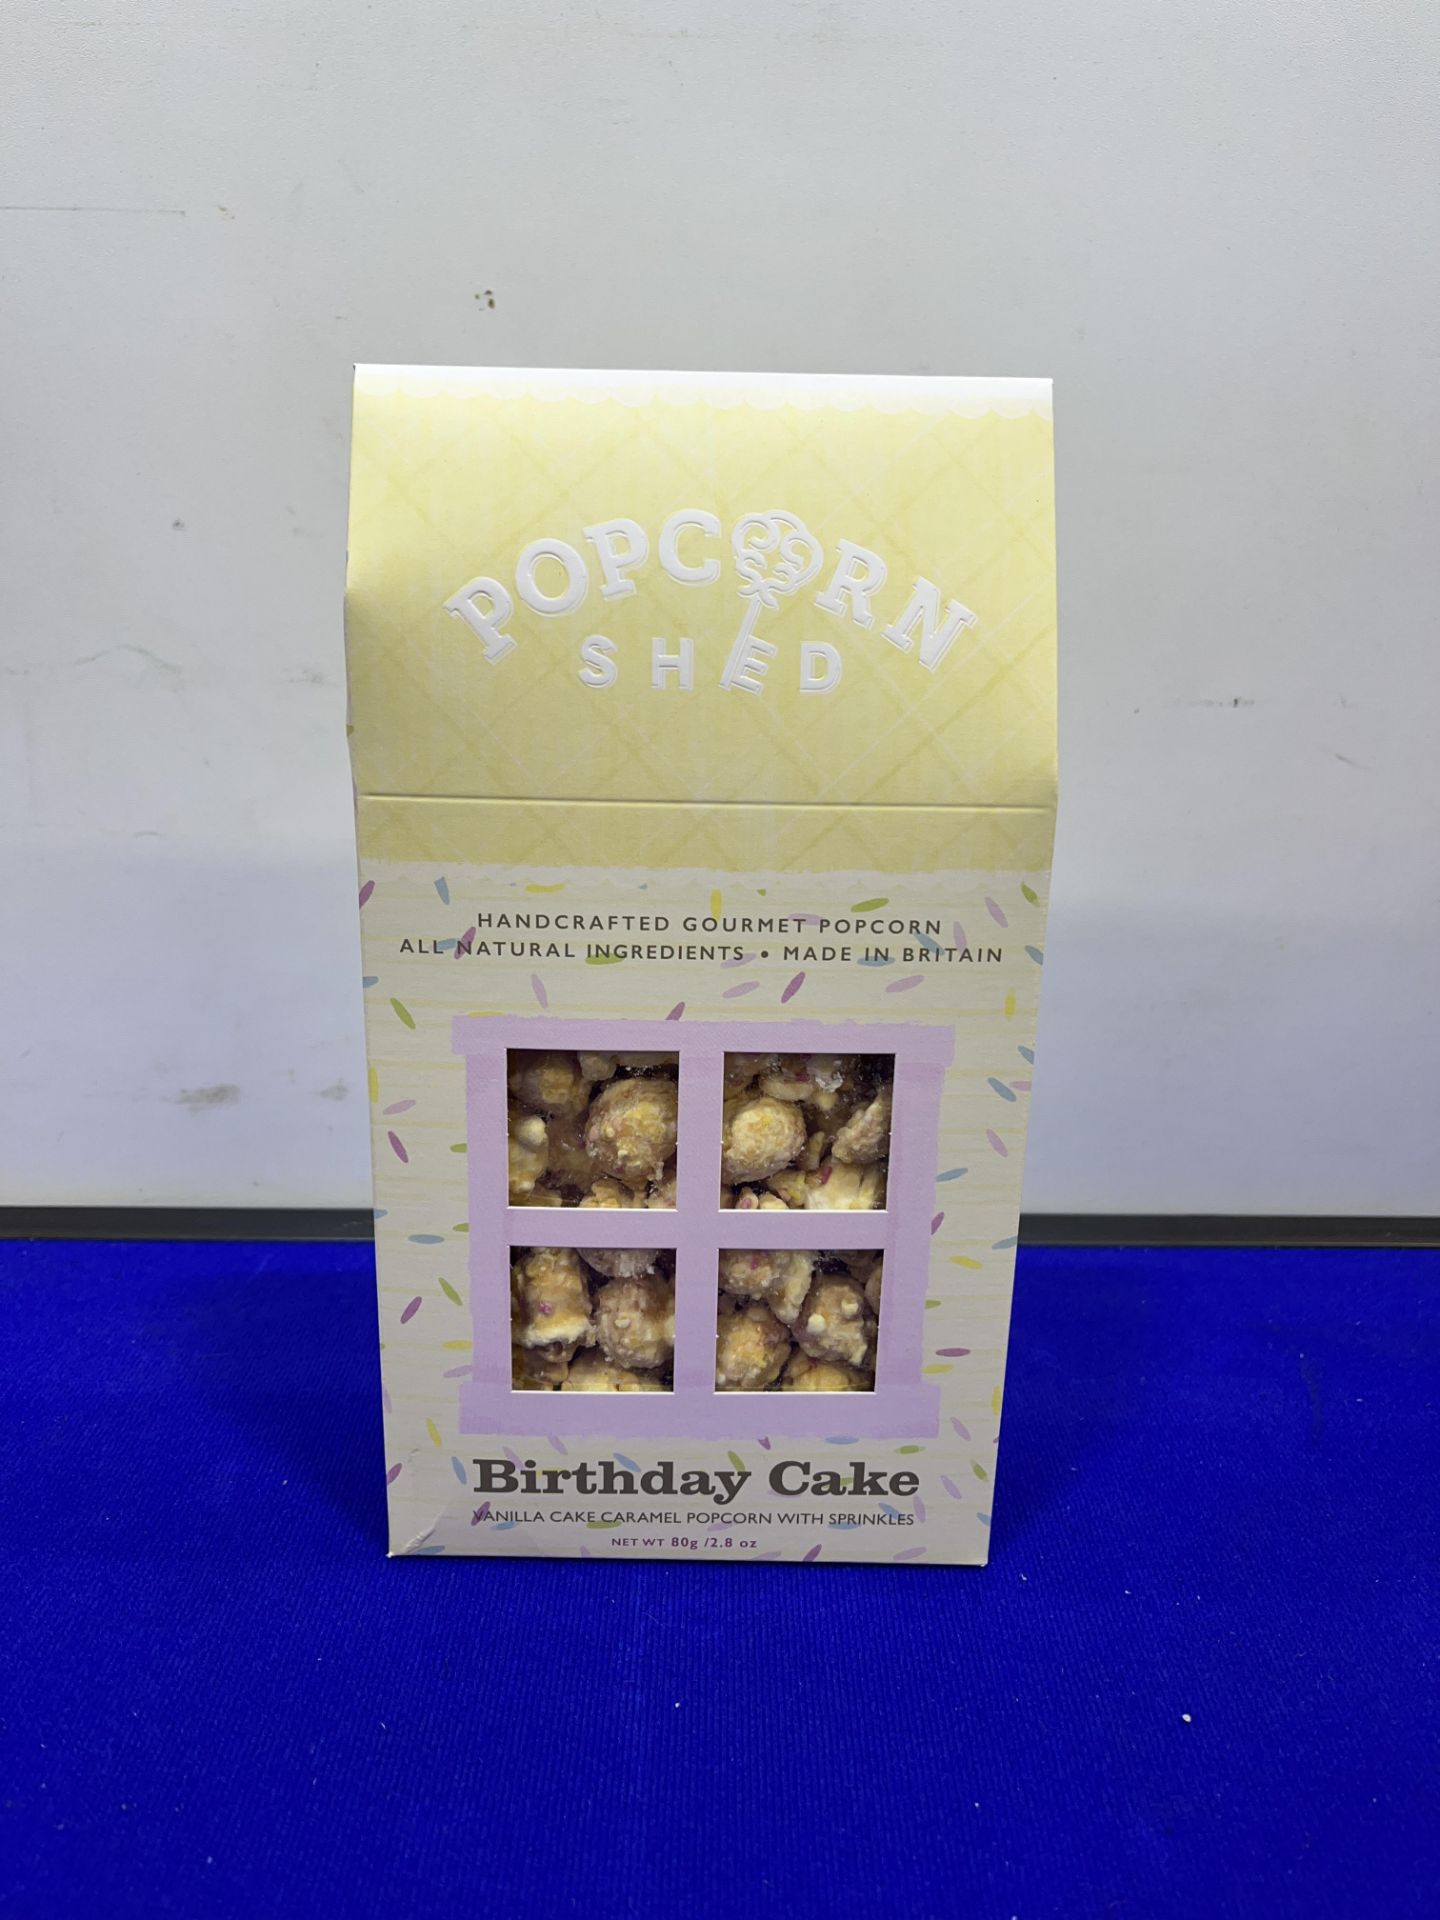 61 x Various 80g Popcorn Shed Gift Packs